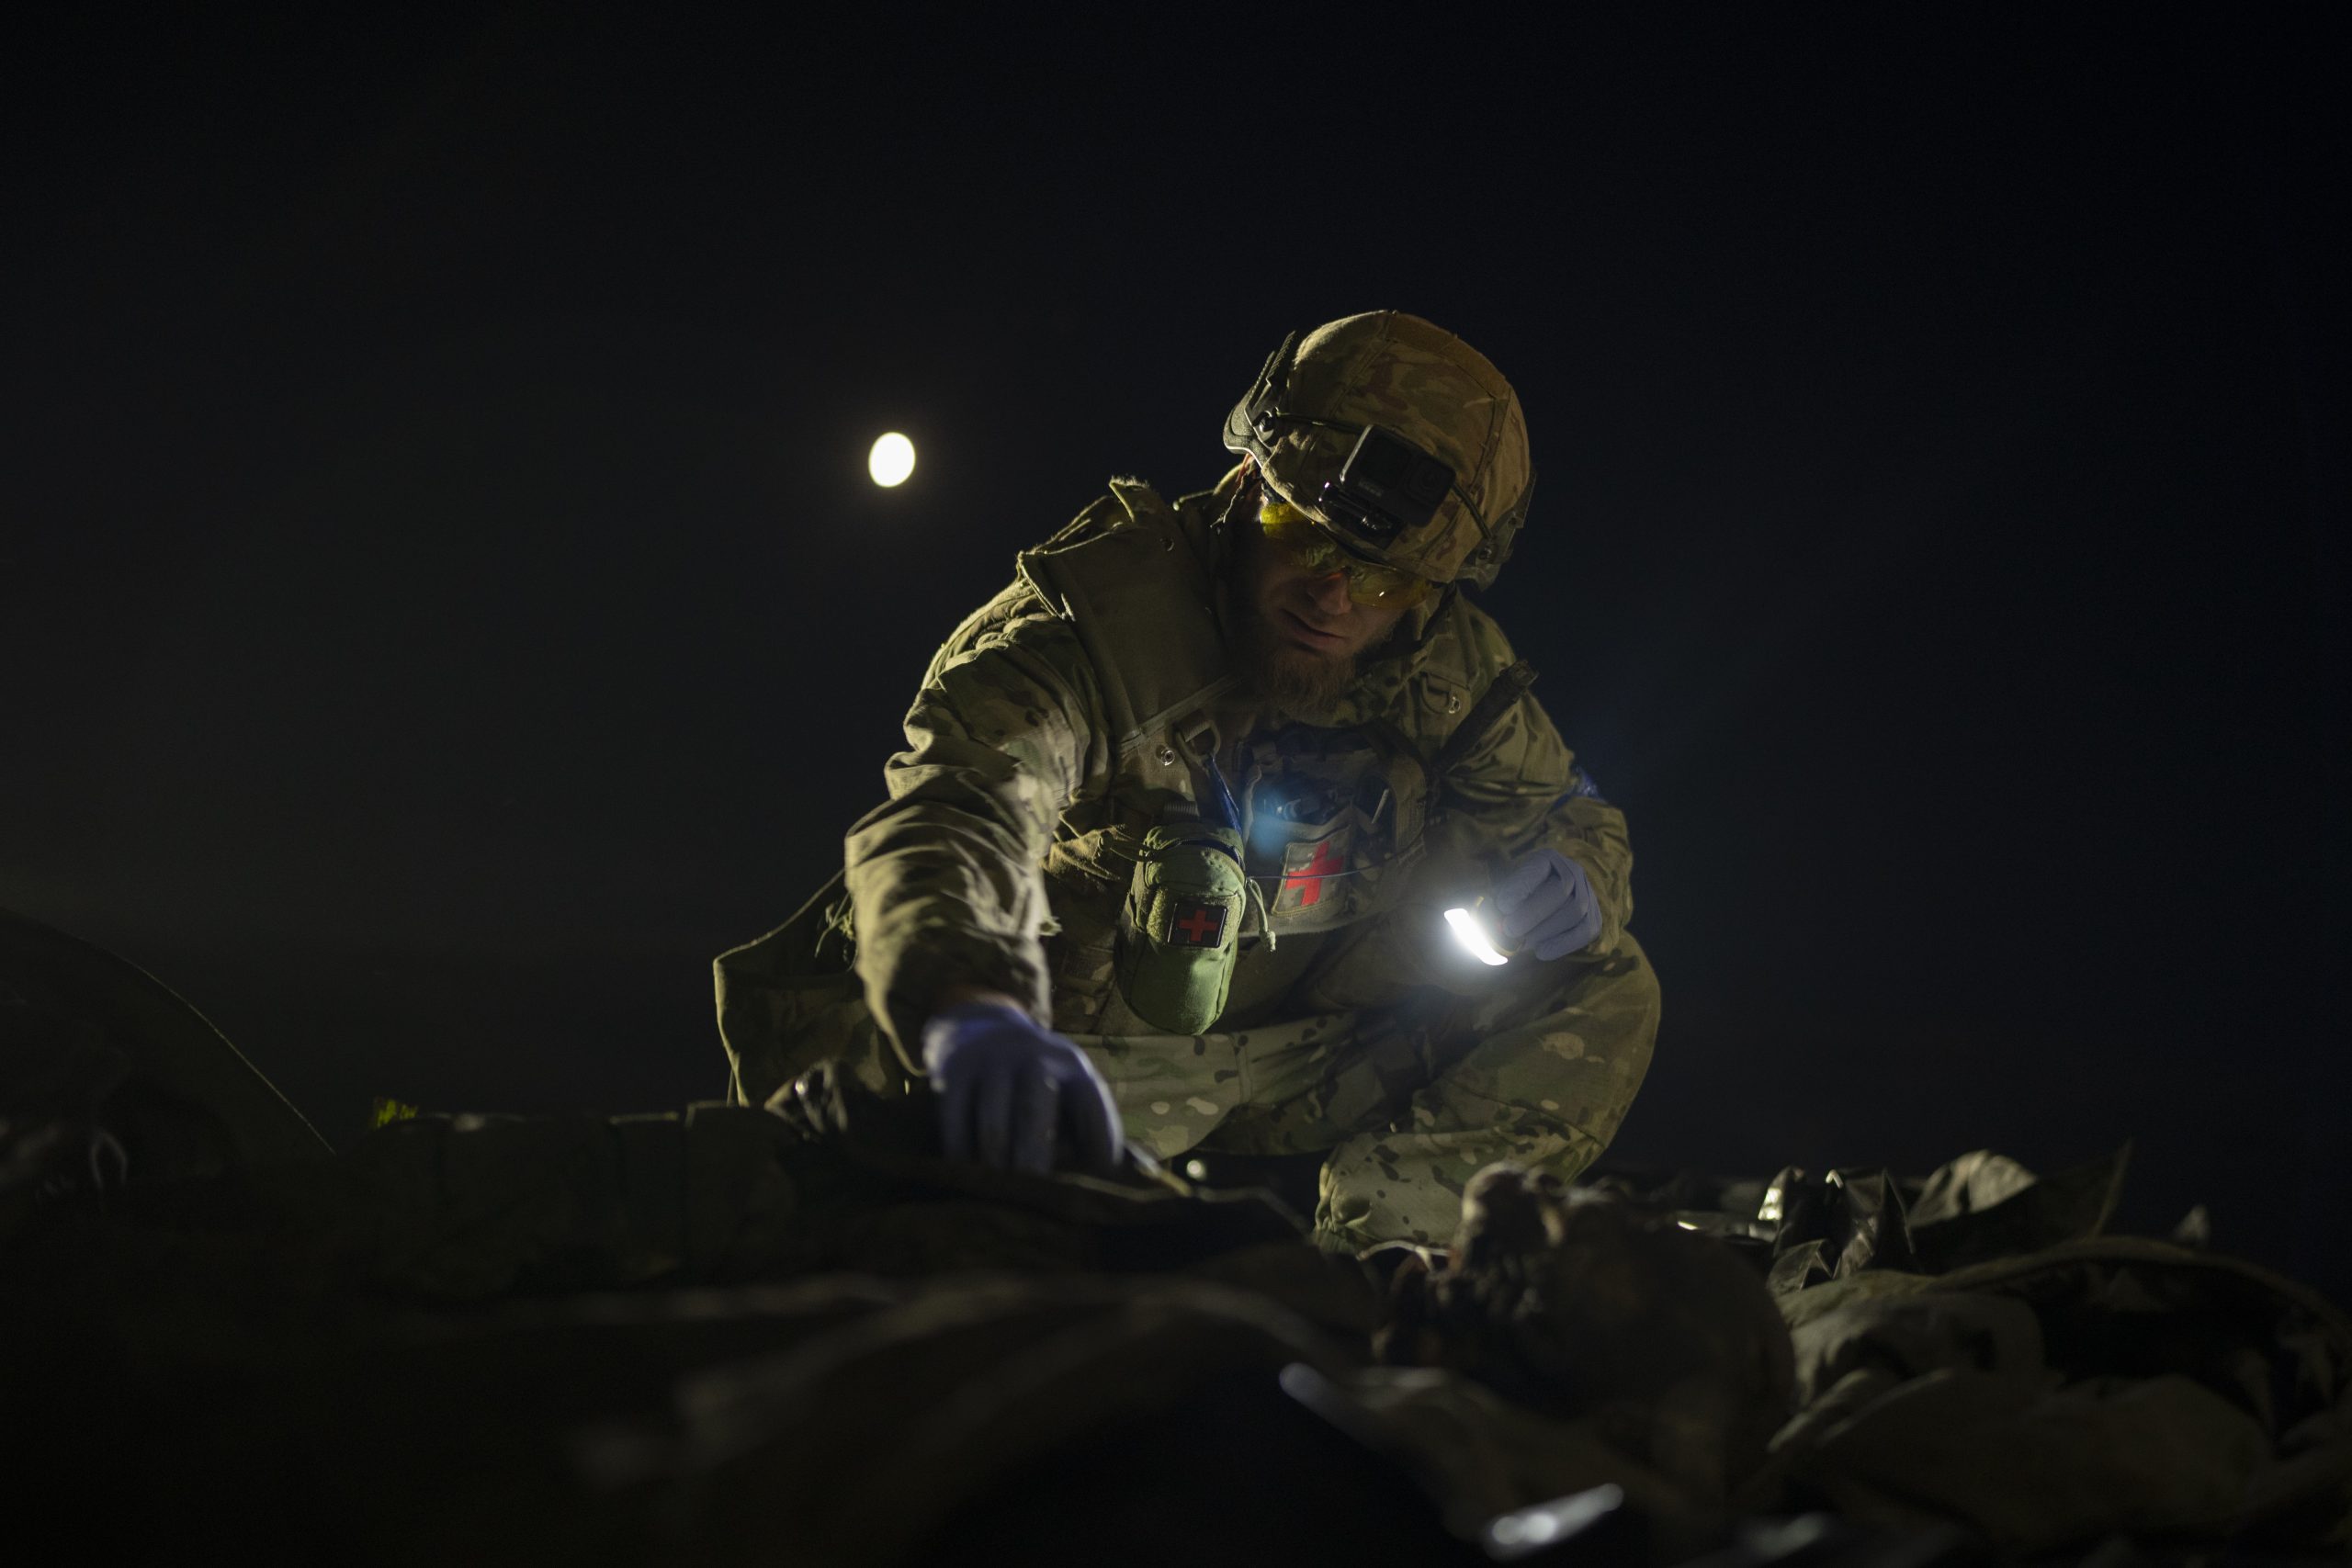 Oleksii Yukov, dressed in a camouflage uniform, holds a small light while examining a body. The body is shown in silhouette only.